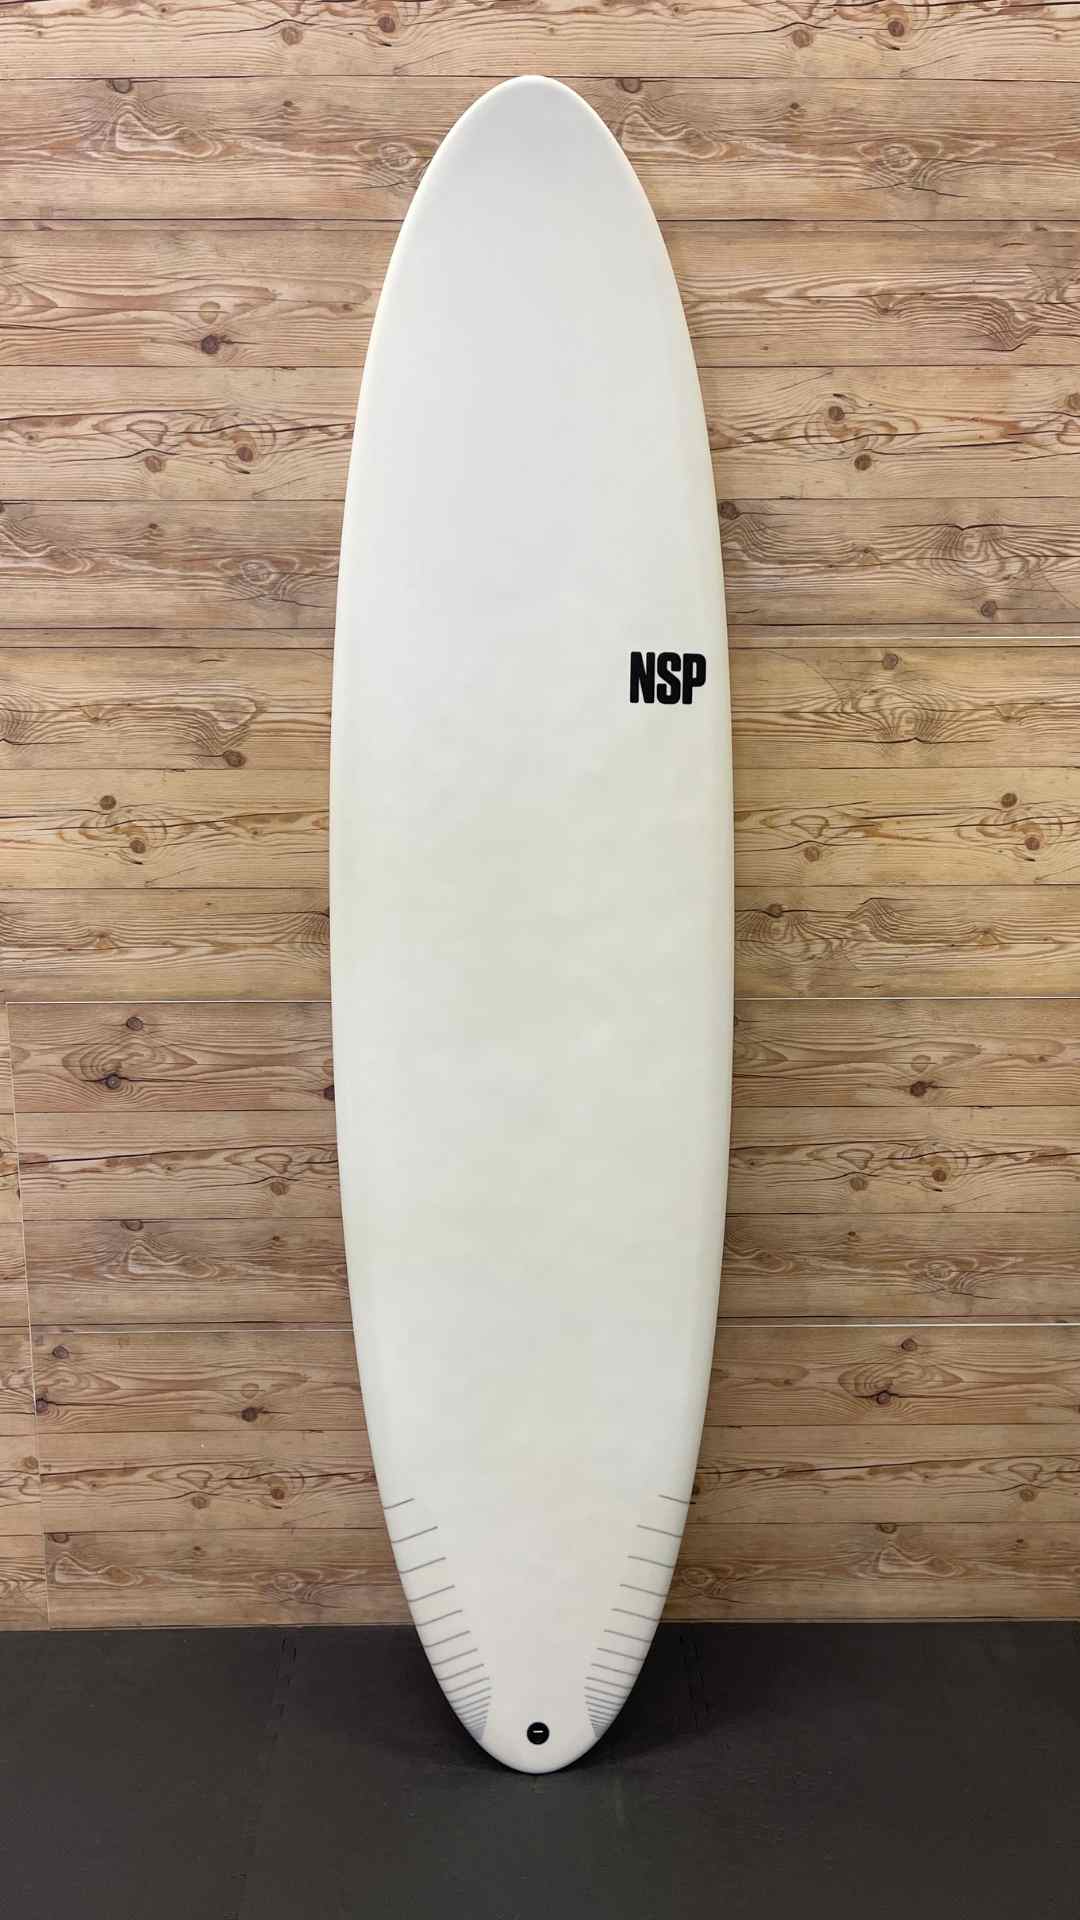 Protech Funboard 7'2"